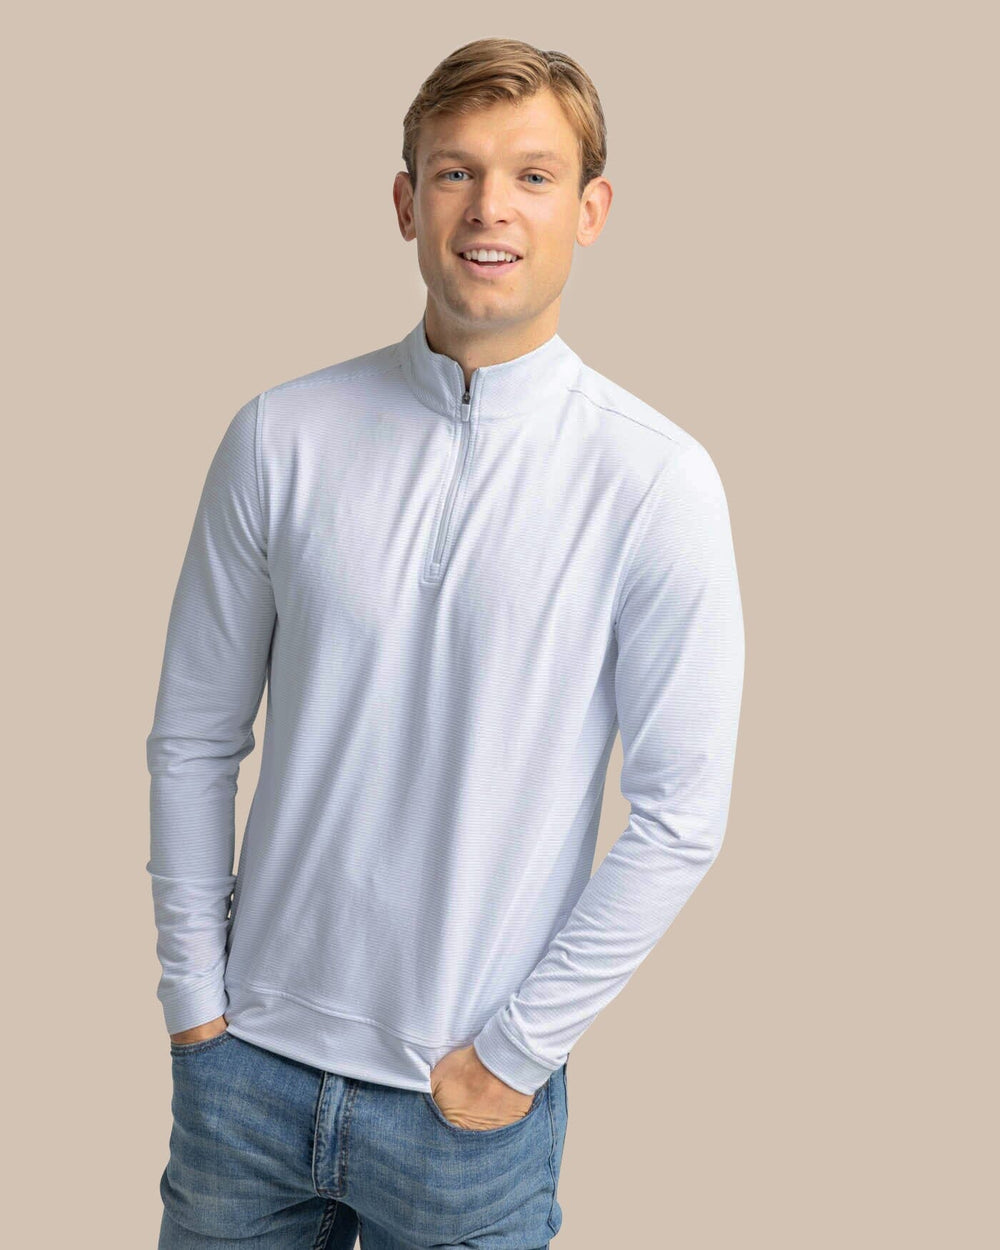 The front view of the Southern Tide Cruiser Micro-Stripe Heather Quarter Zip by Southern Tide - Heather Slate Grey